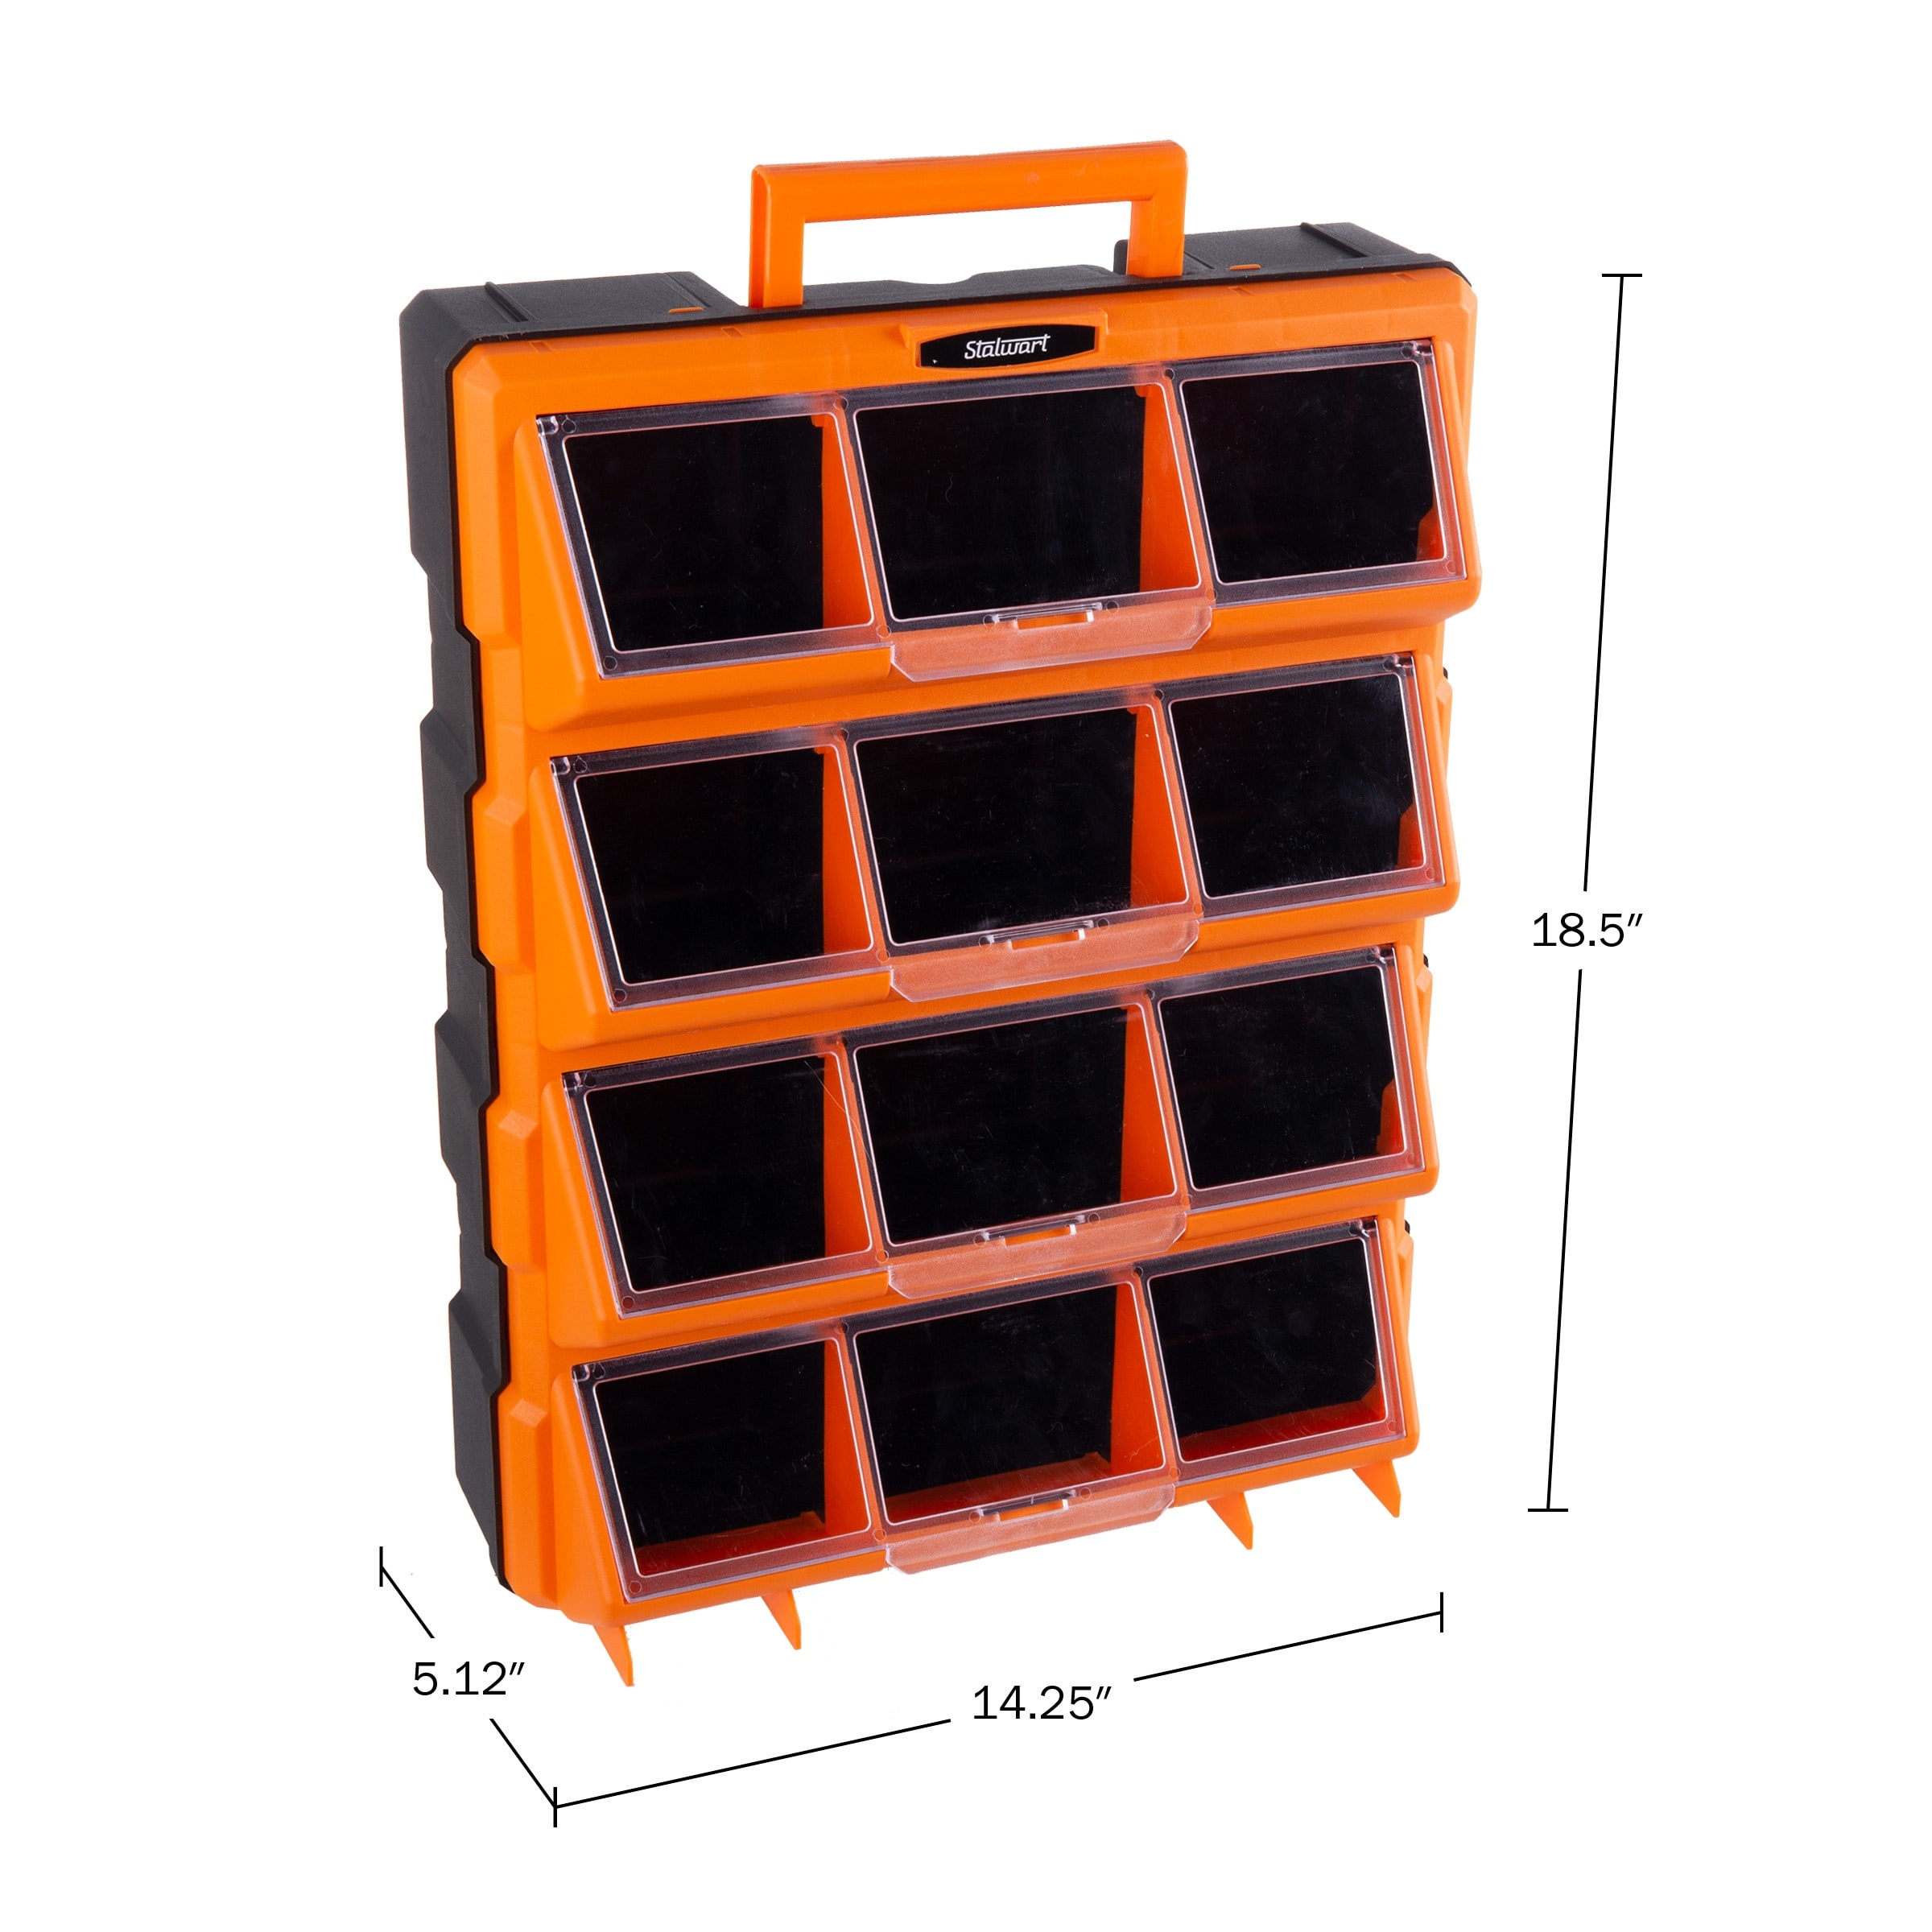 https://ak1.ostkcdn.com/images/products/is/images/direct/7226a99cacc22faffc022f8de98d30c97d2d5d35/Plastic-Storage-Drawers---12-Bin-Screw-Organizer-by-Stalwart-%28Black%29.jpg